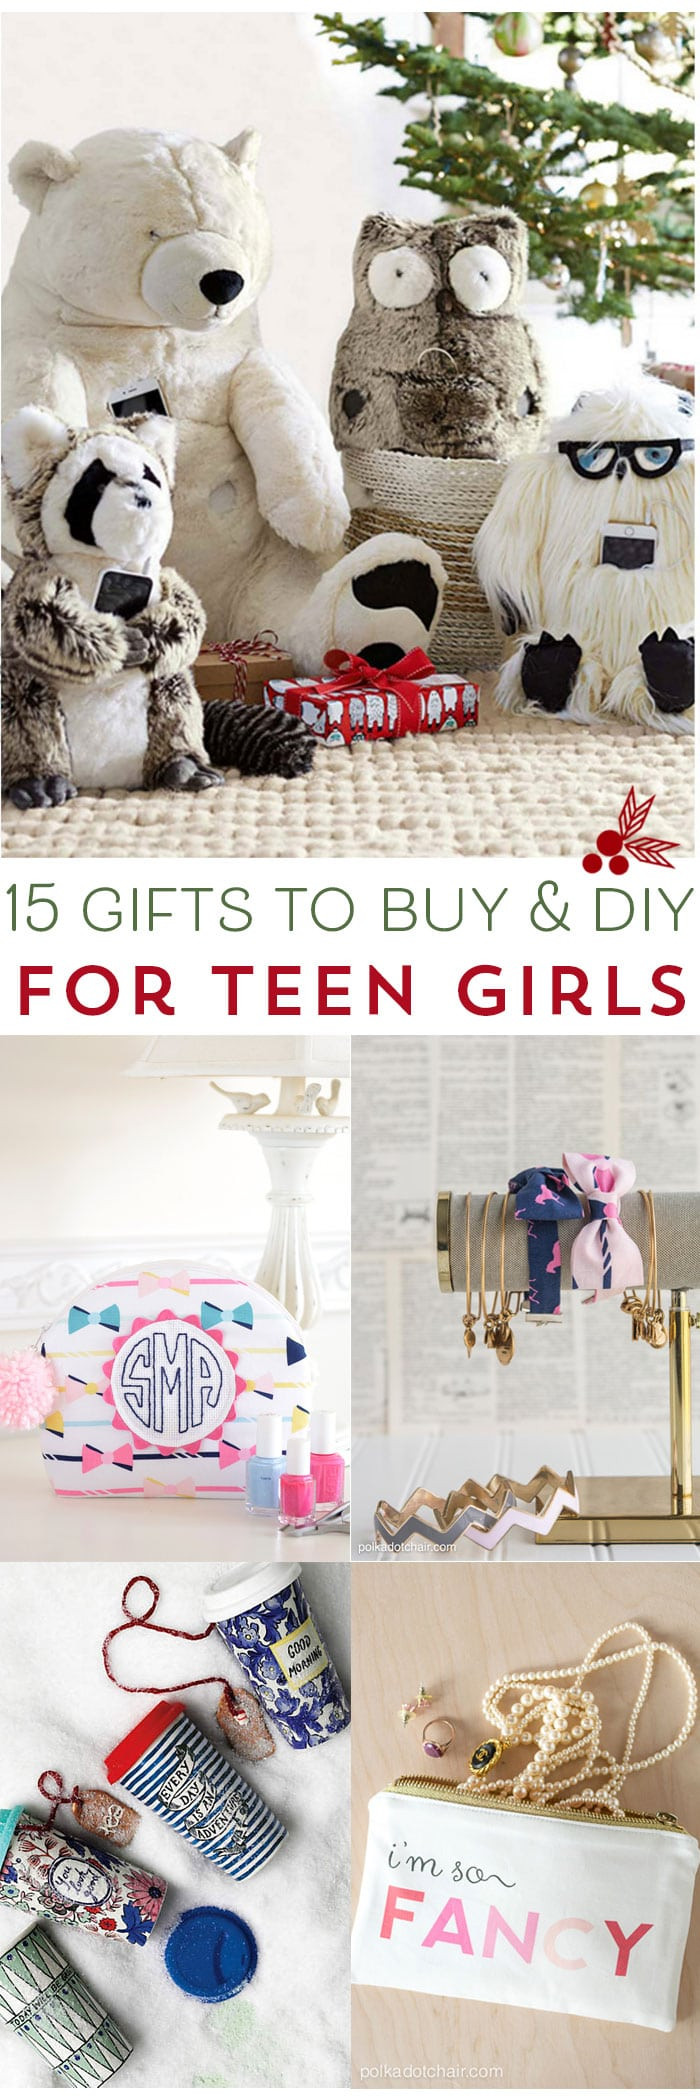 DIY Gifts For Girls
 15 Gifts for Teen Girls to DIY and Buy The Polka Dot Chair